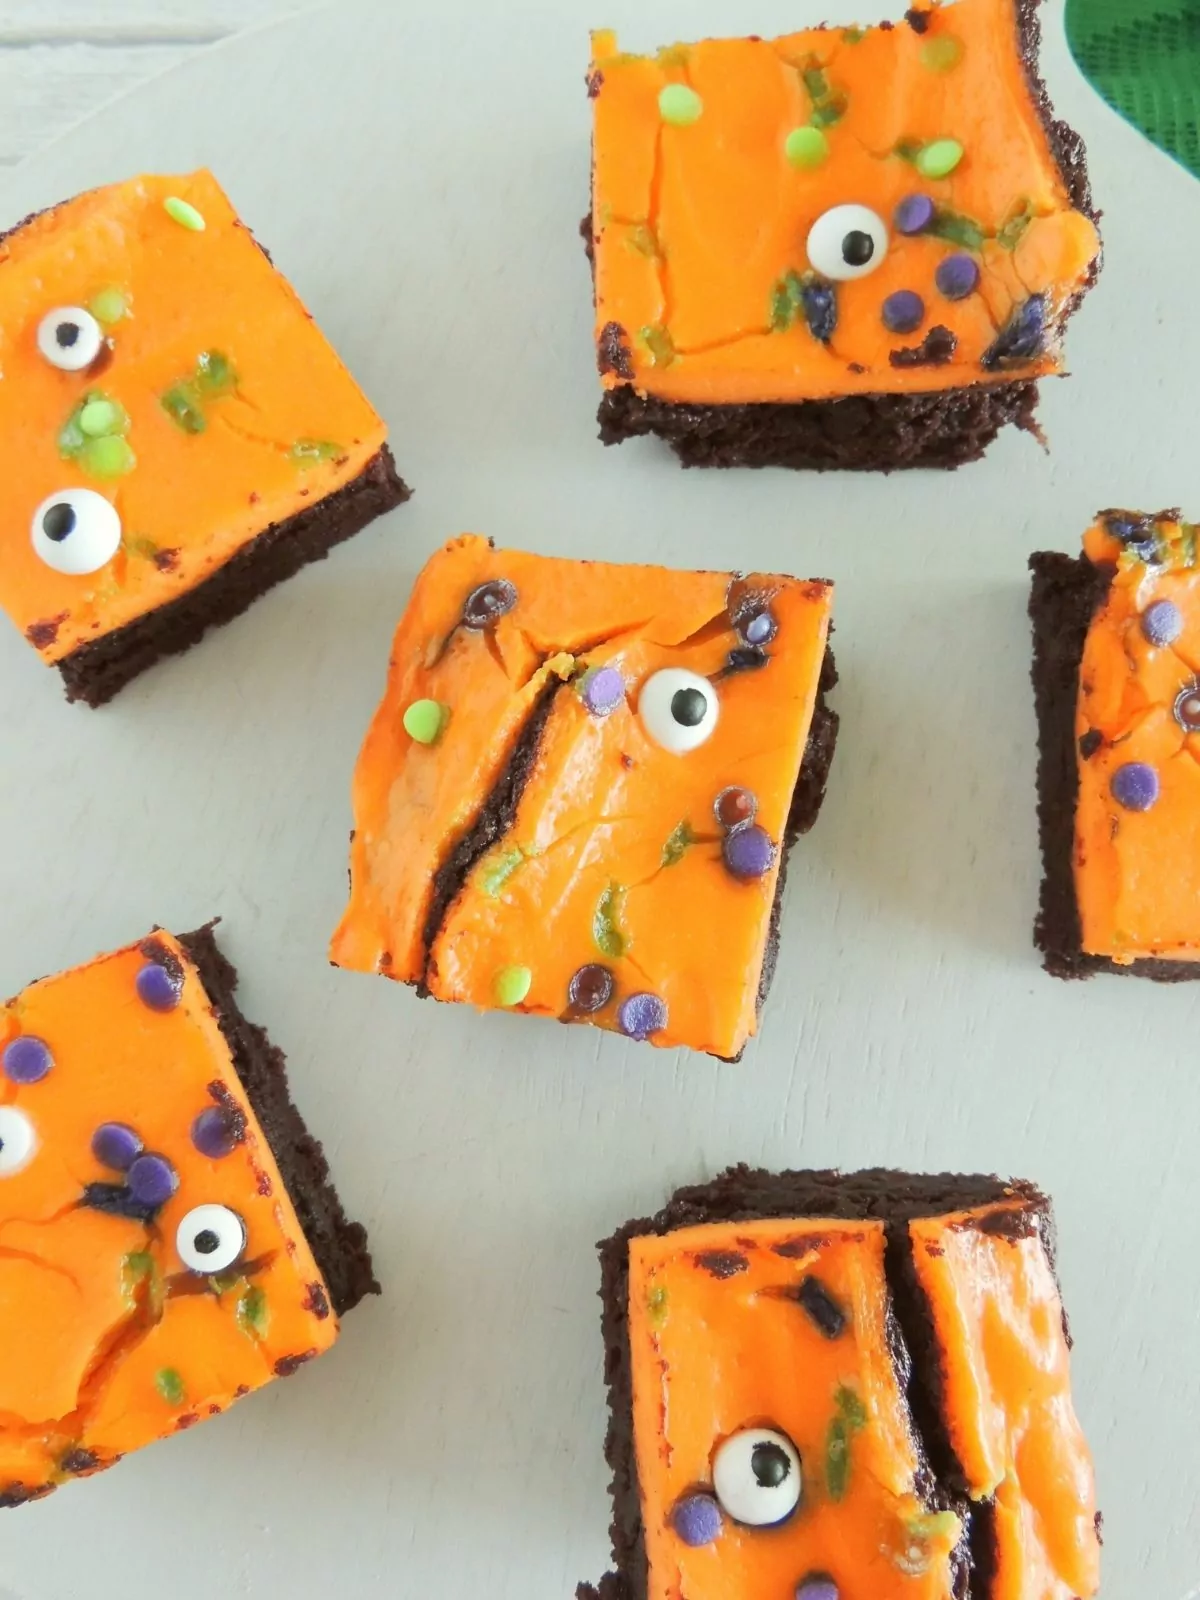 Orange frosted brownies for Halloween.